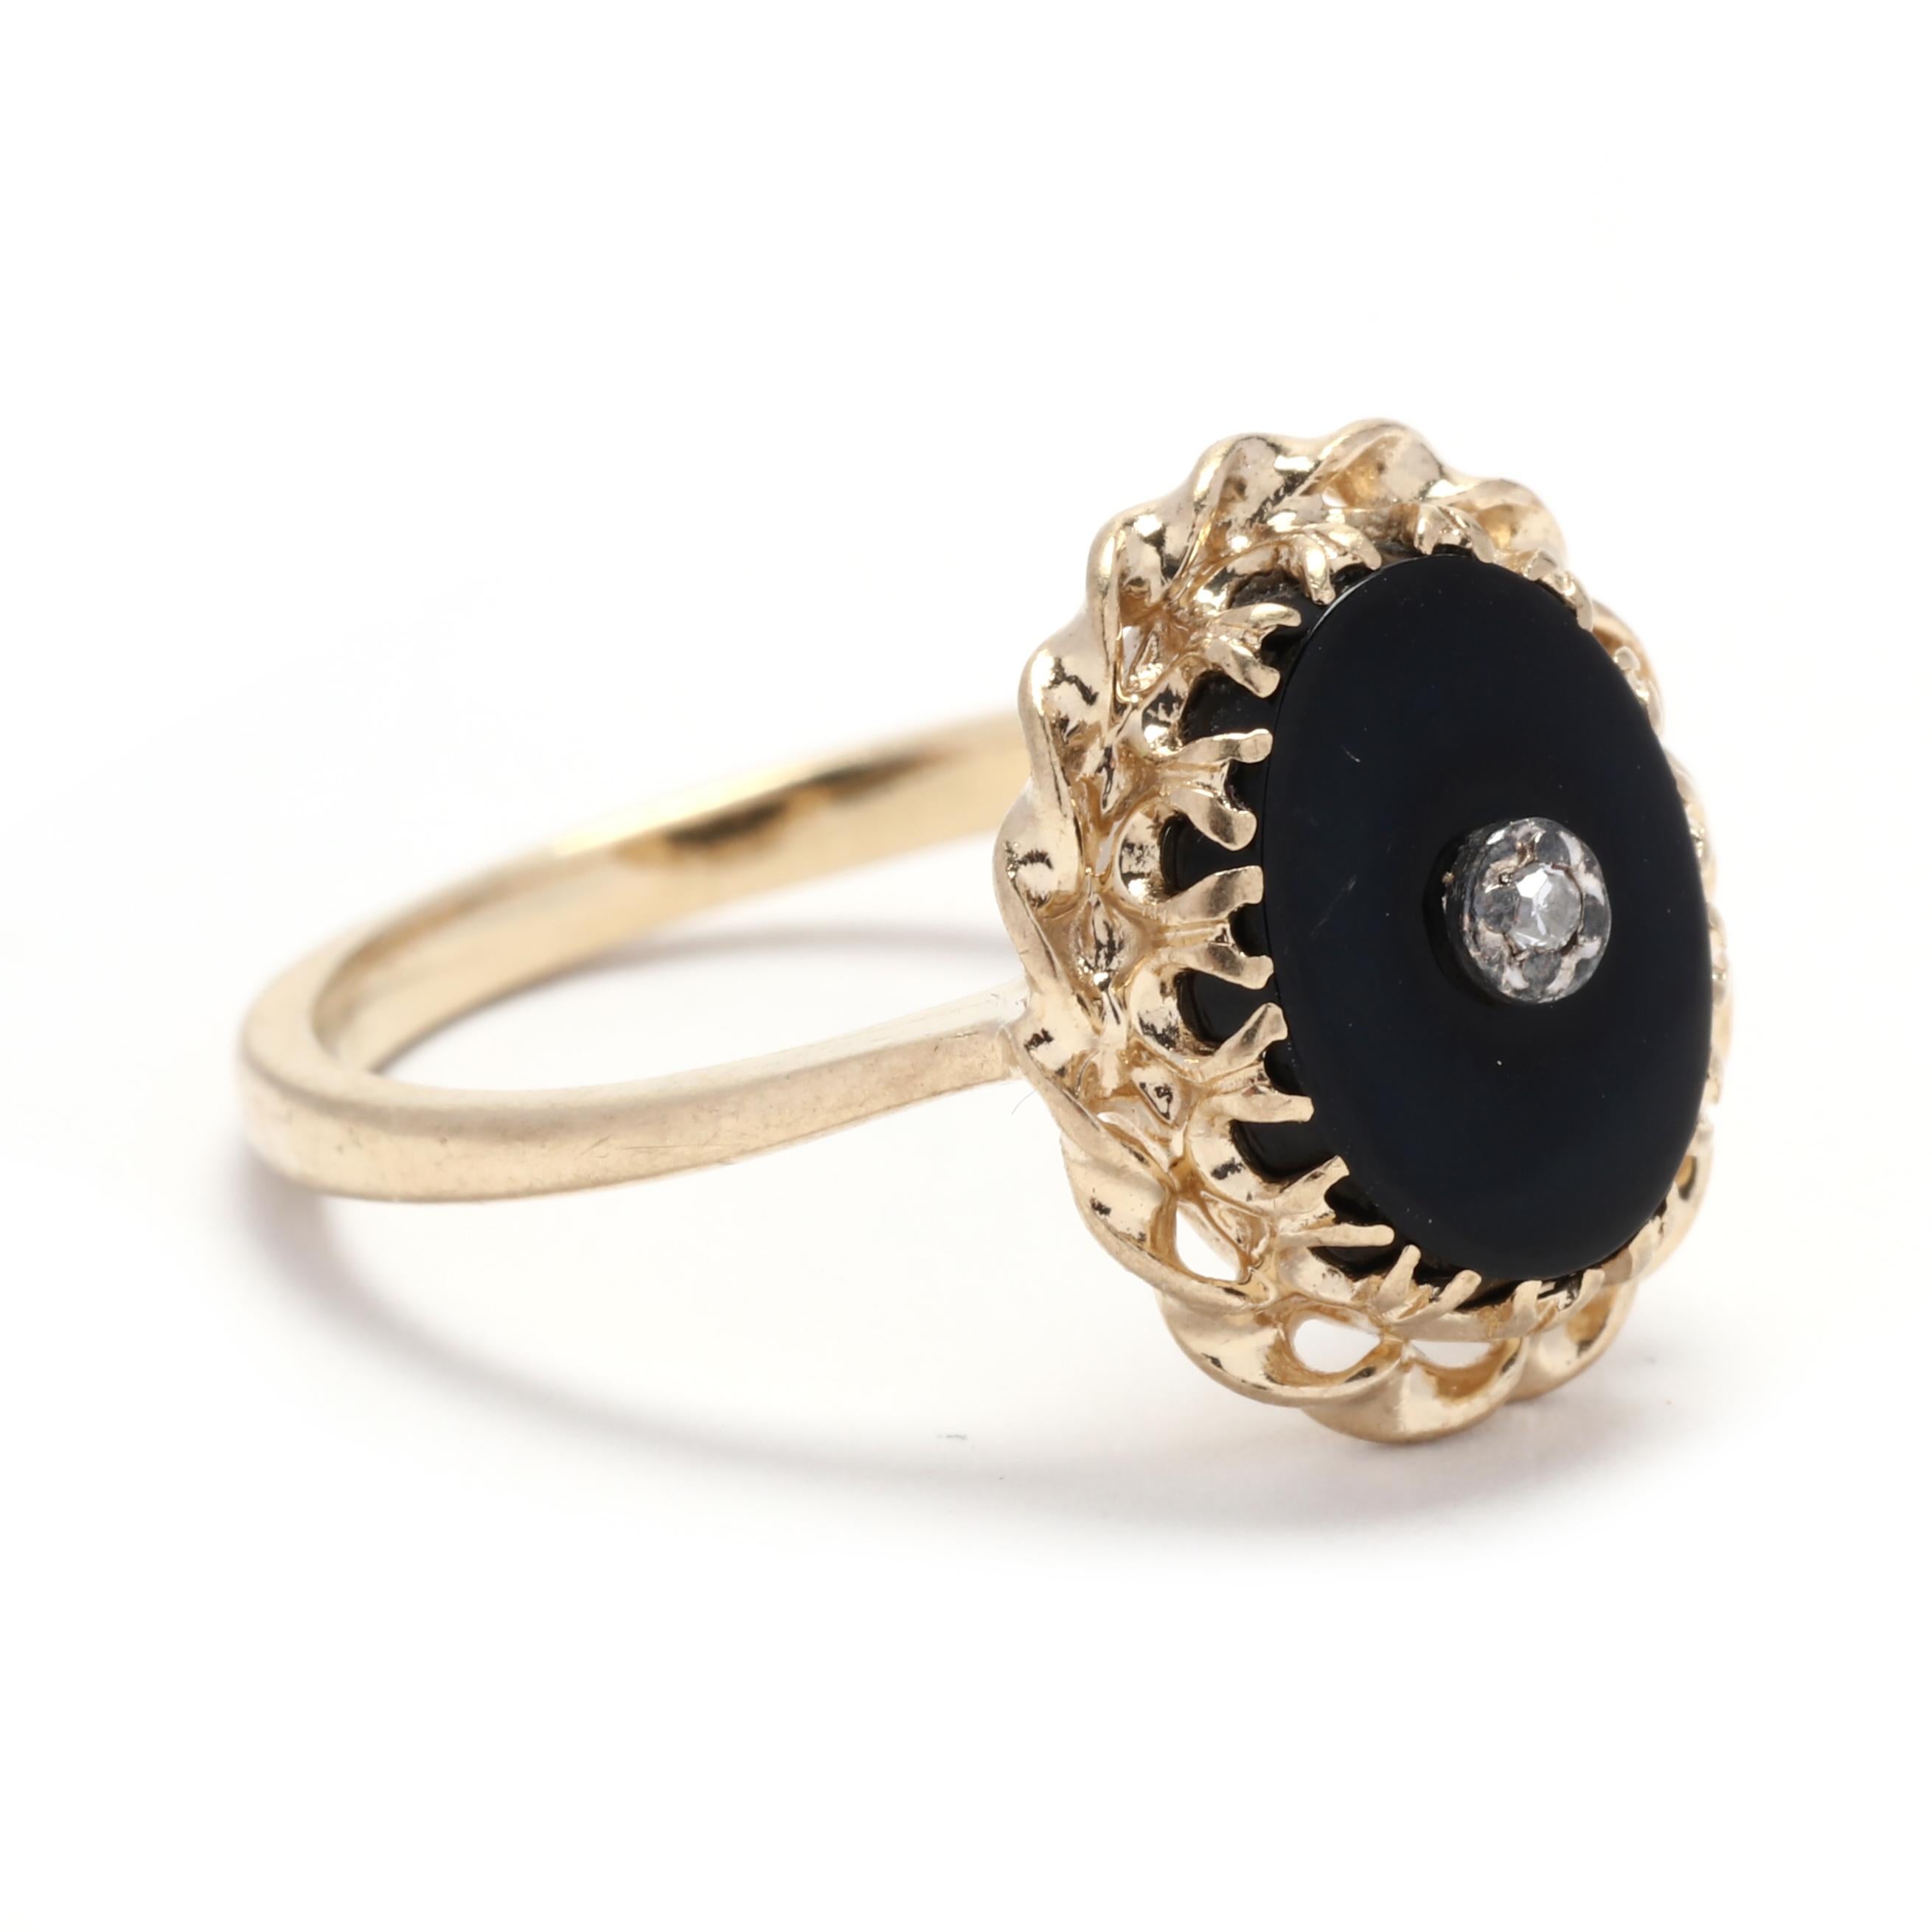 Crafted in 10K yellow gold, this ring features a stunning oval-shaped black onyx stone. The deep black color of the onyx creates a striking contrast against the yellow gold, adding a dramatic touch to the overall design. This ring is available in a